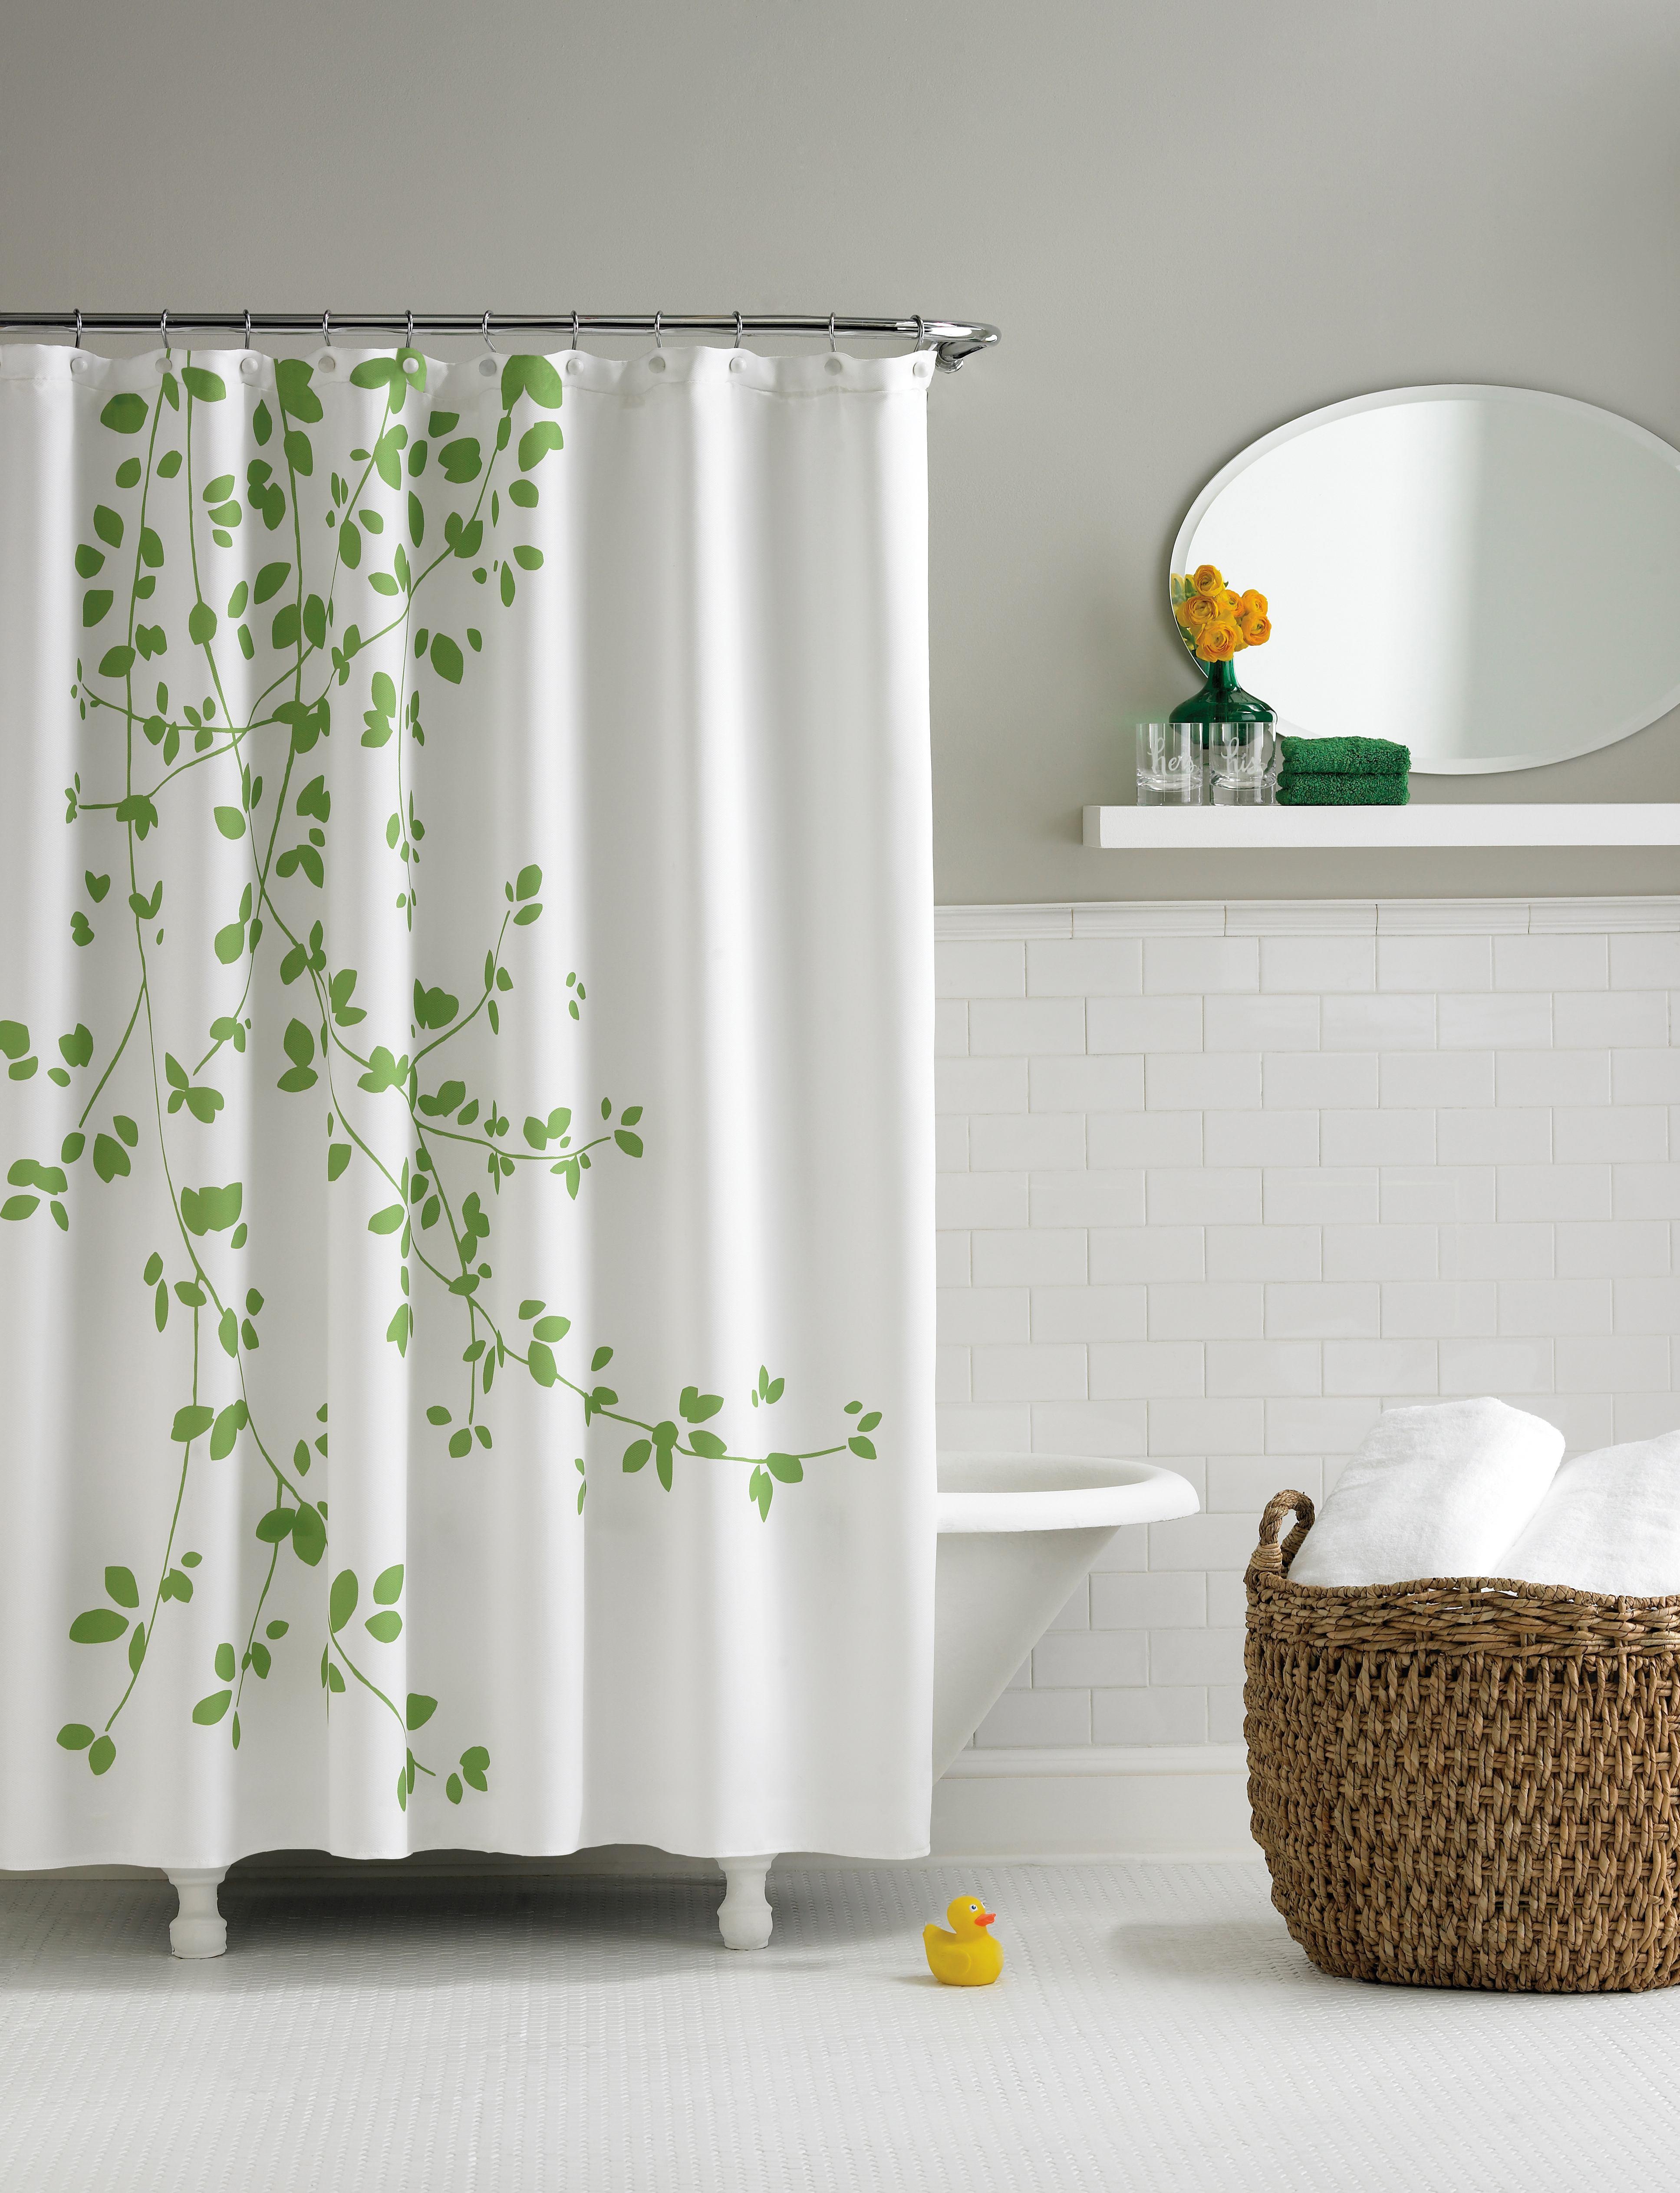 Best Shower Curtain Designs For Bathrooms